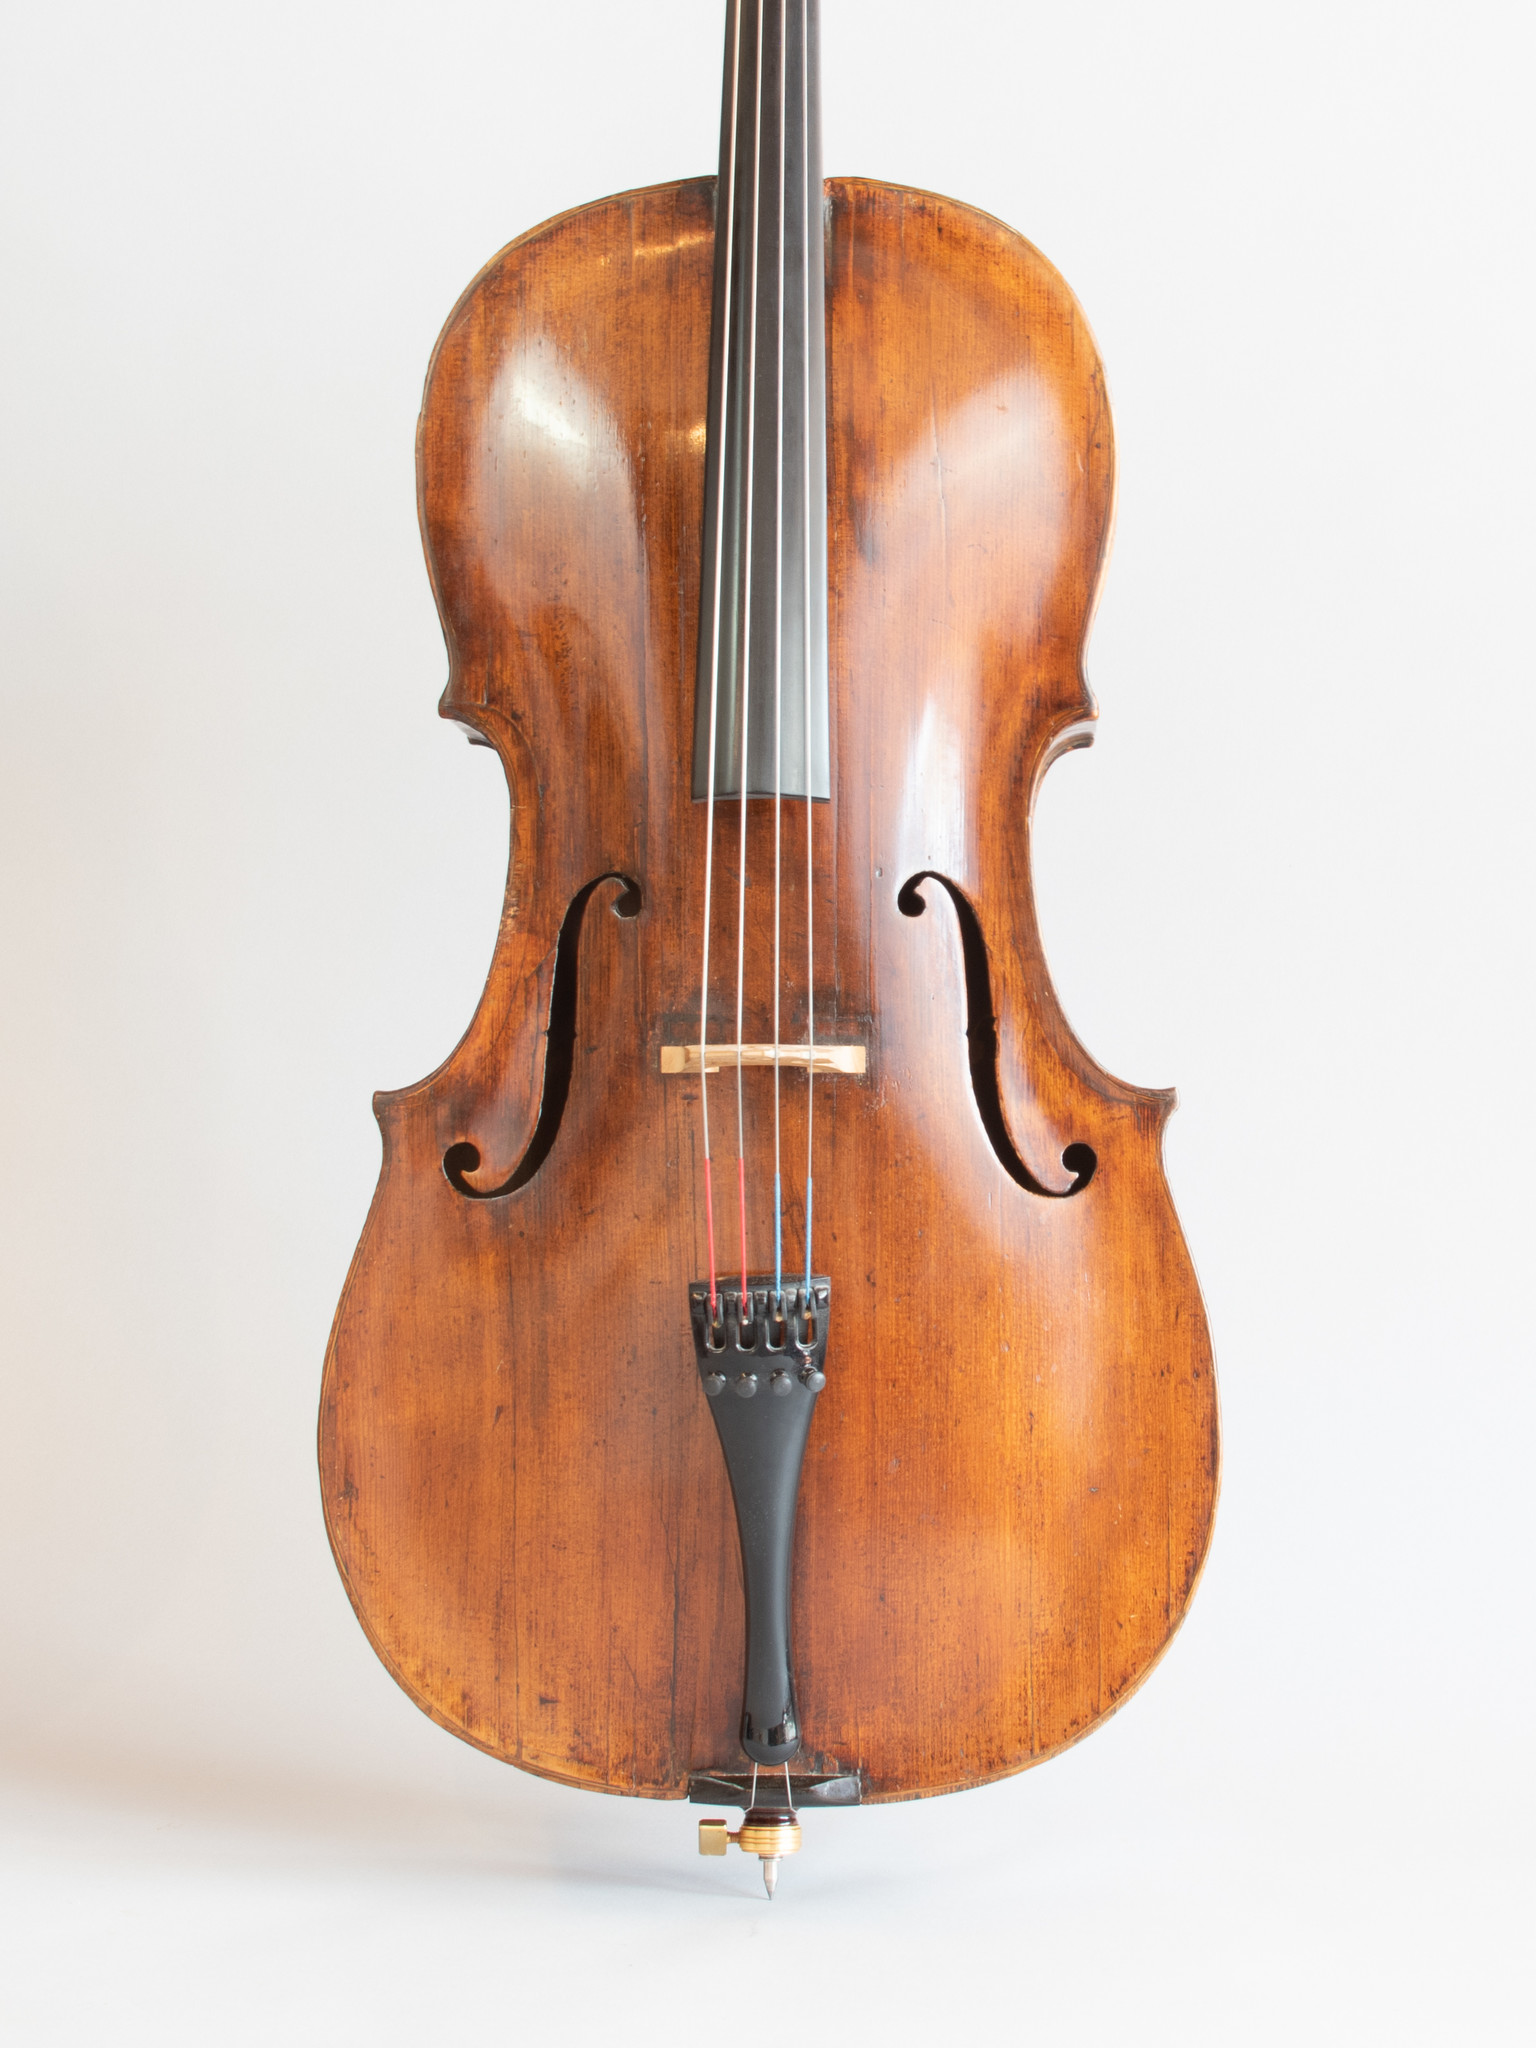 European Old European cello with cut-down top and back, unlabeled